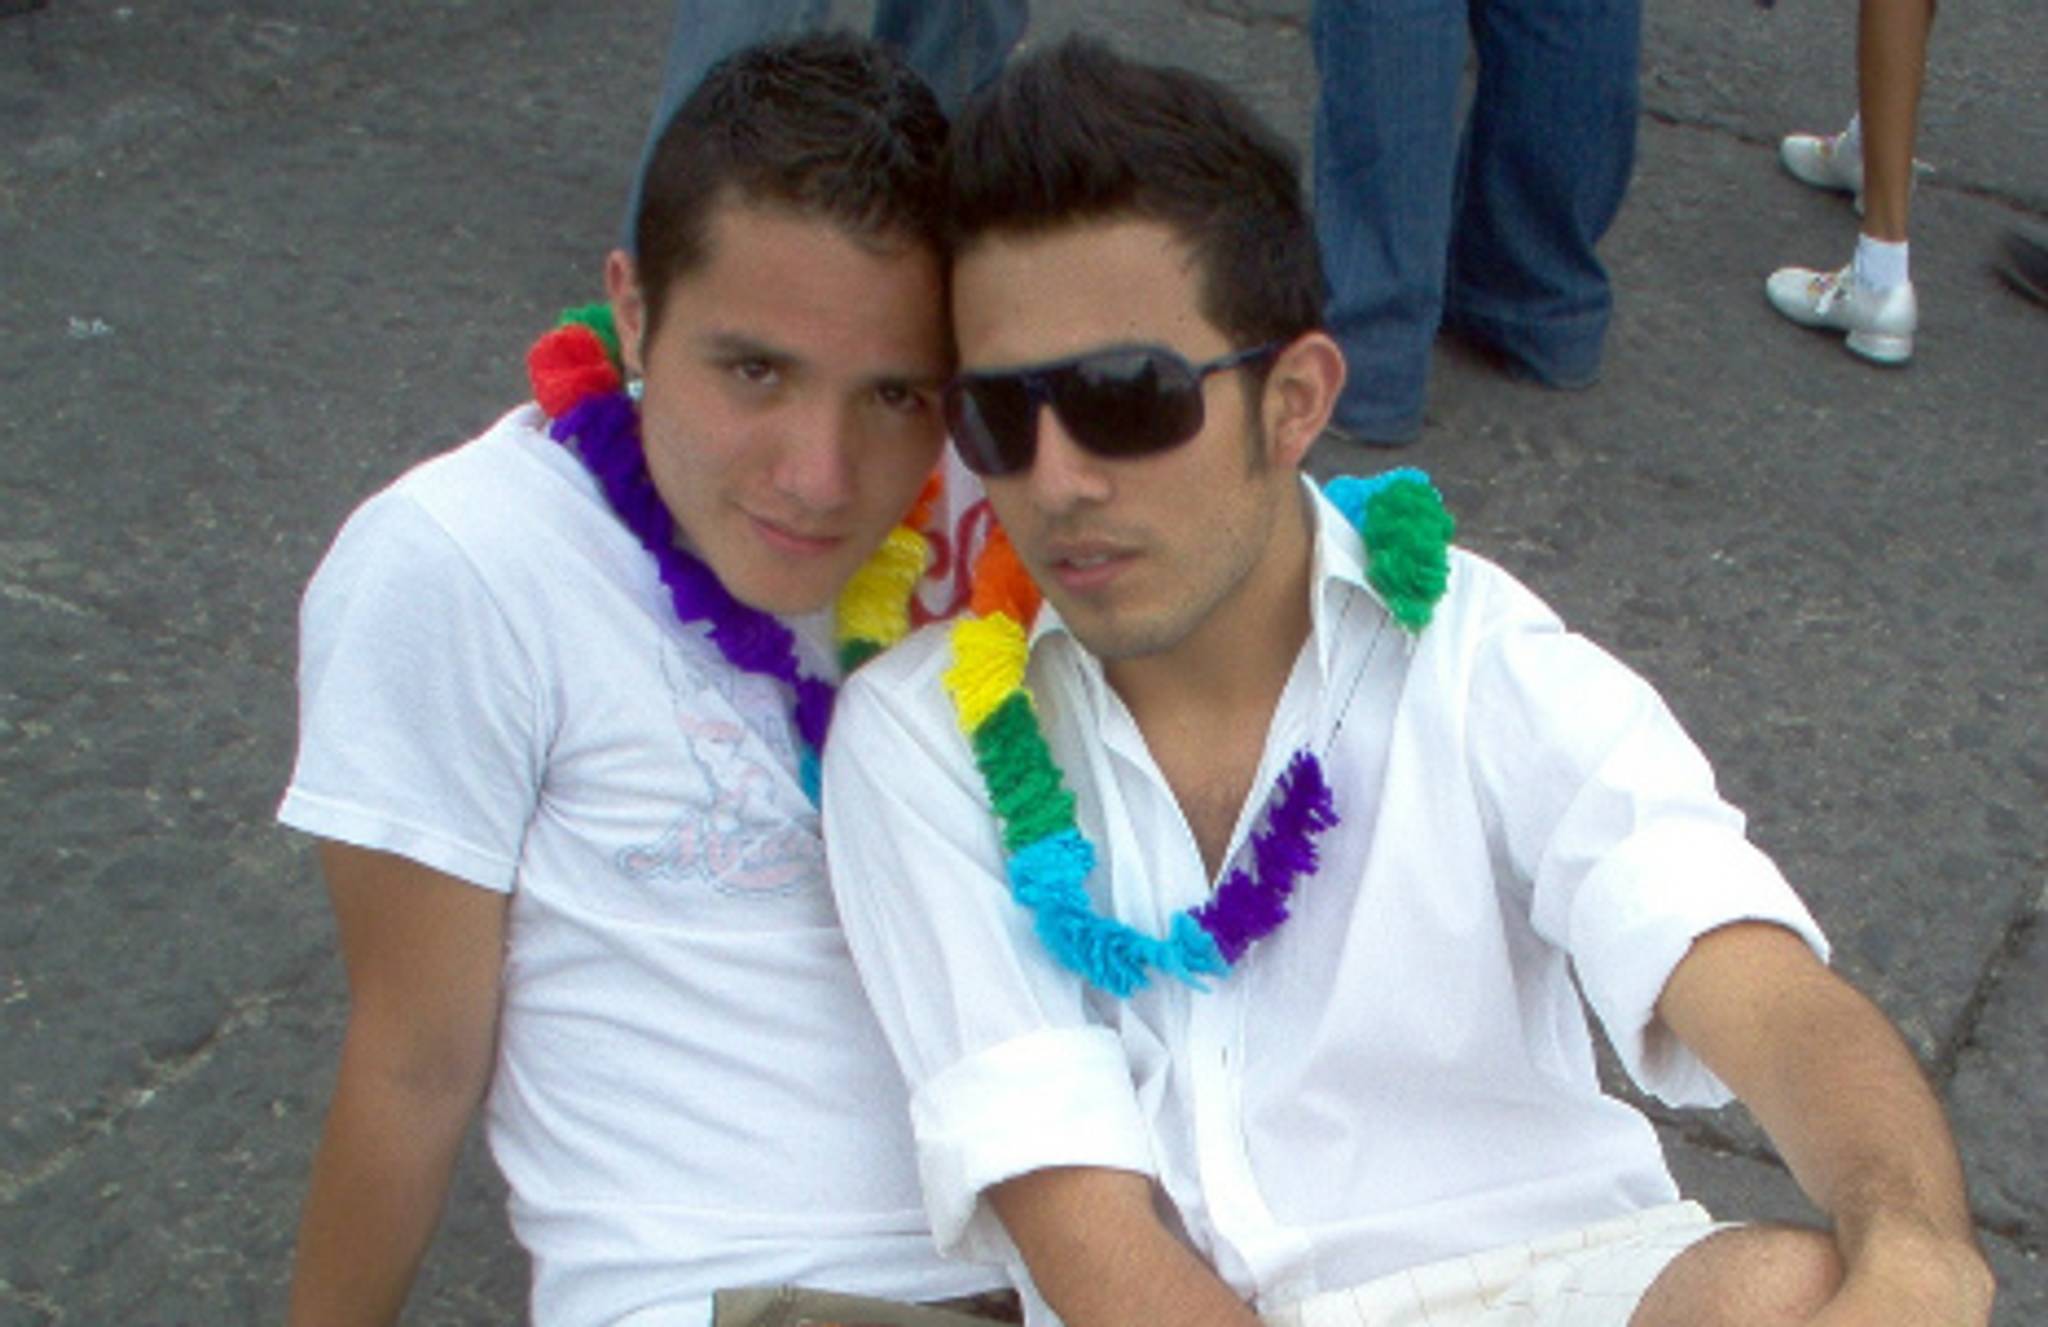 The attractive LGBT market in Mexico